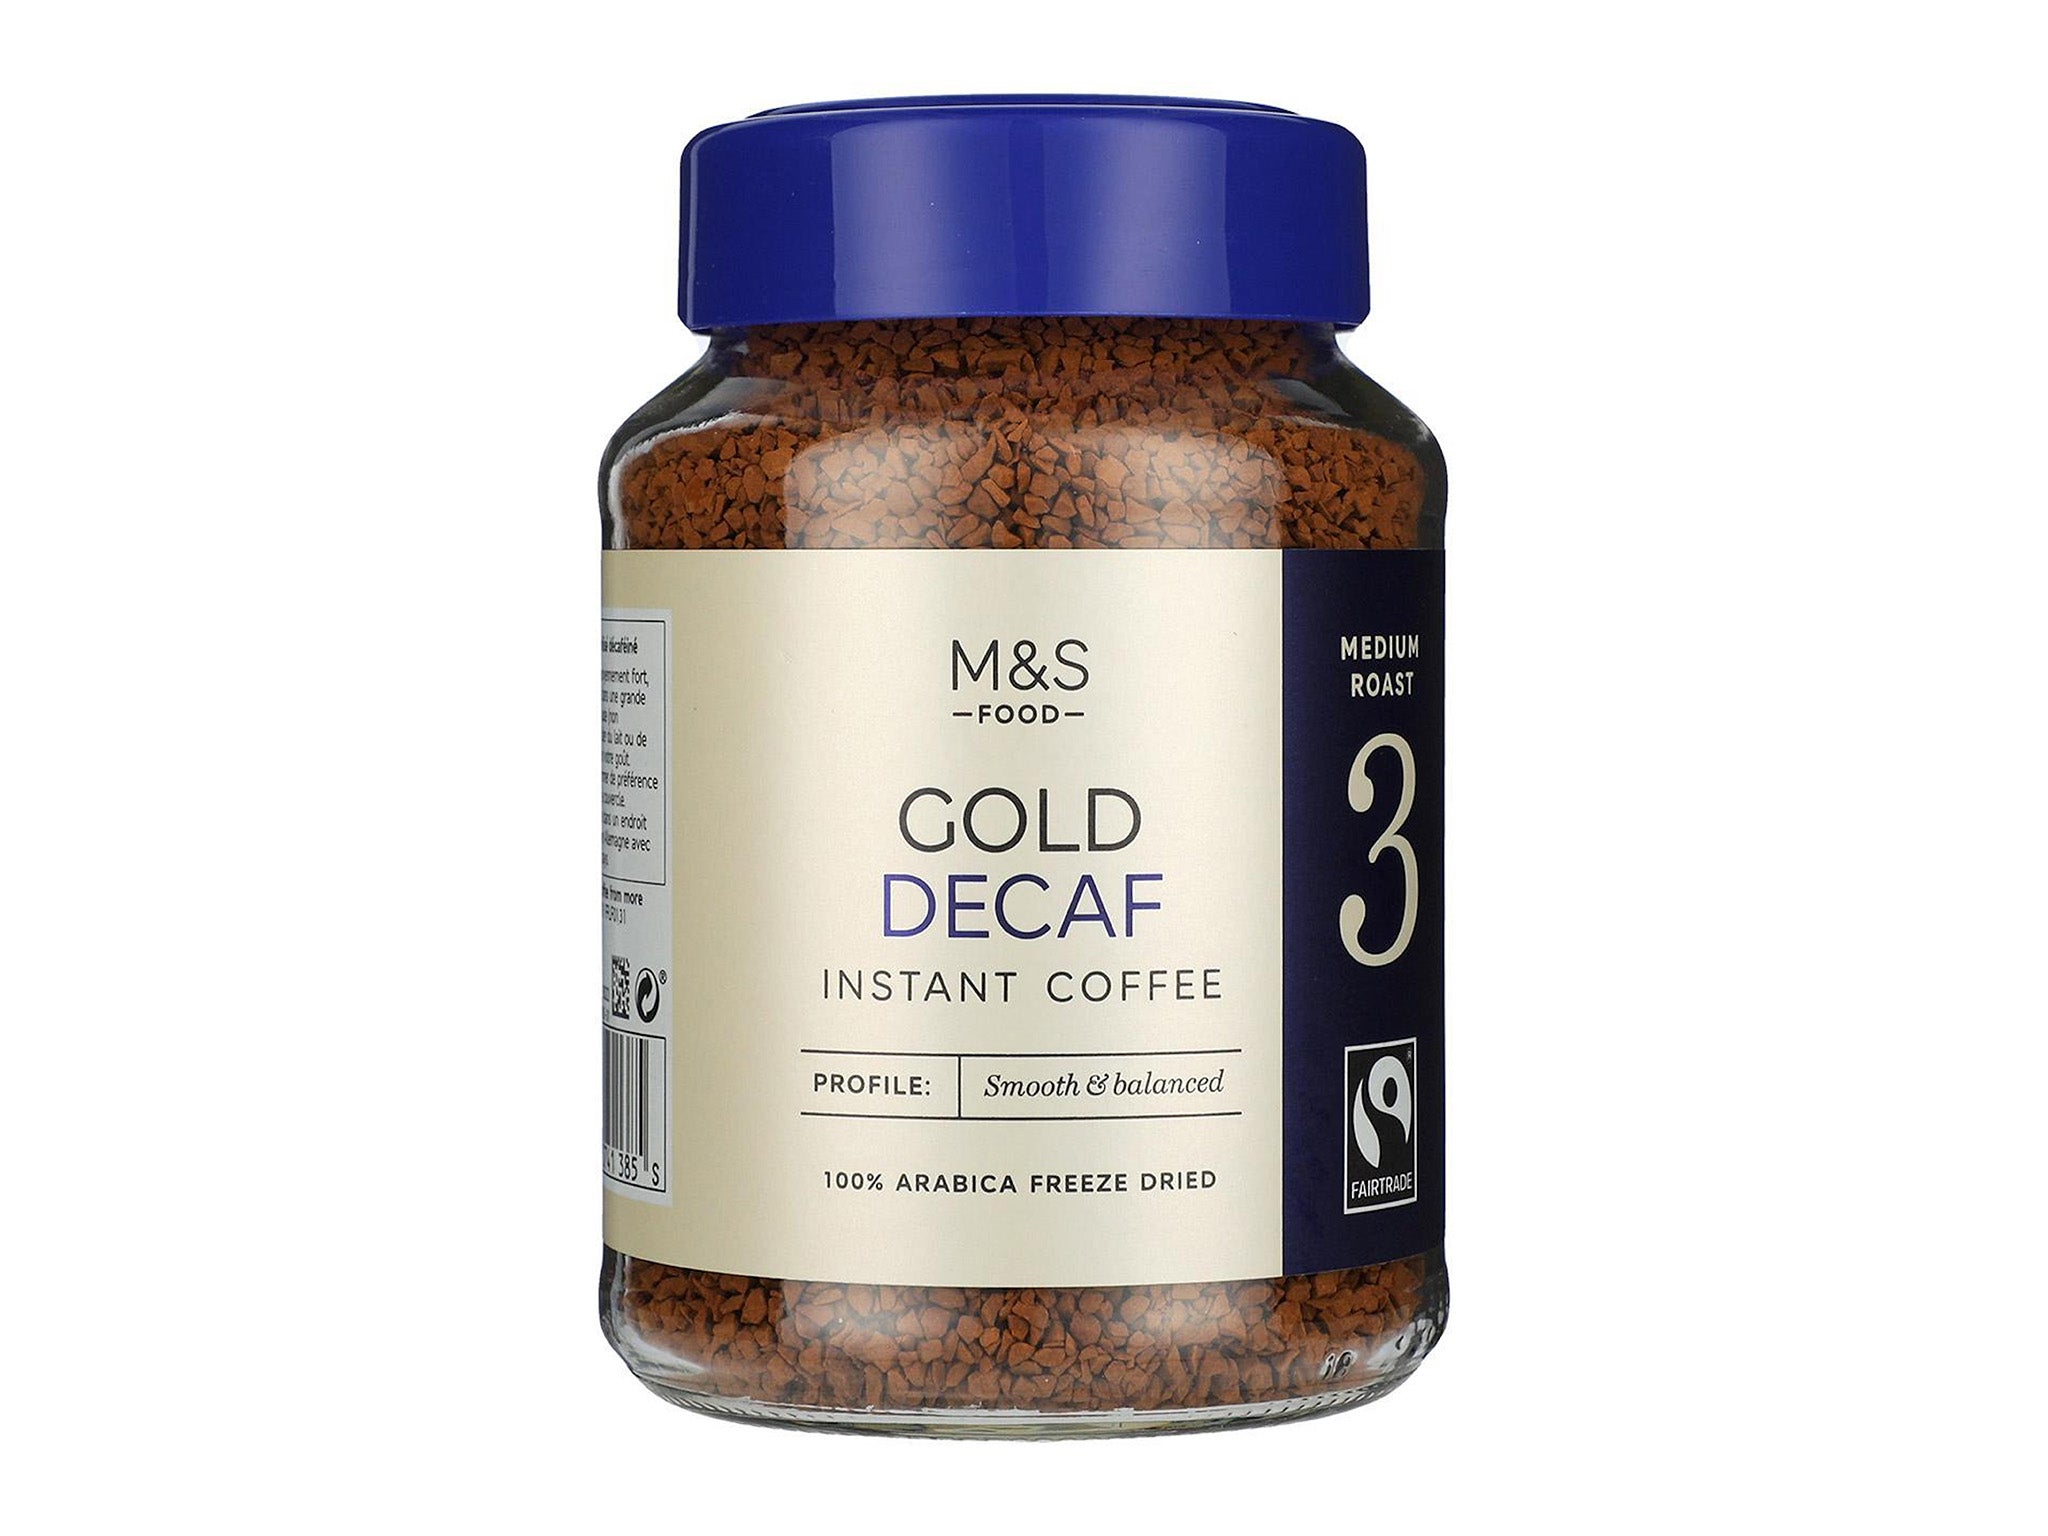 Marks and Spencer gold decaf instant coffee